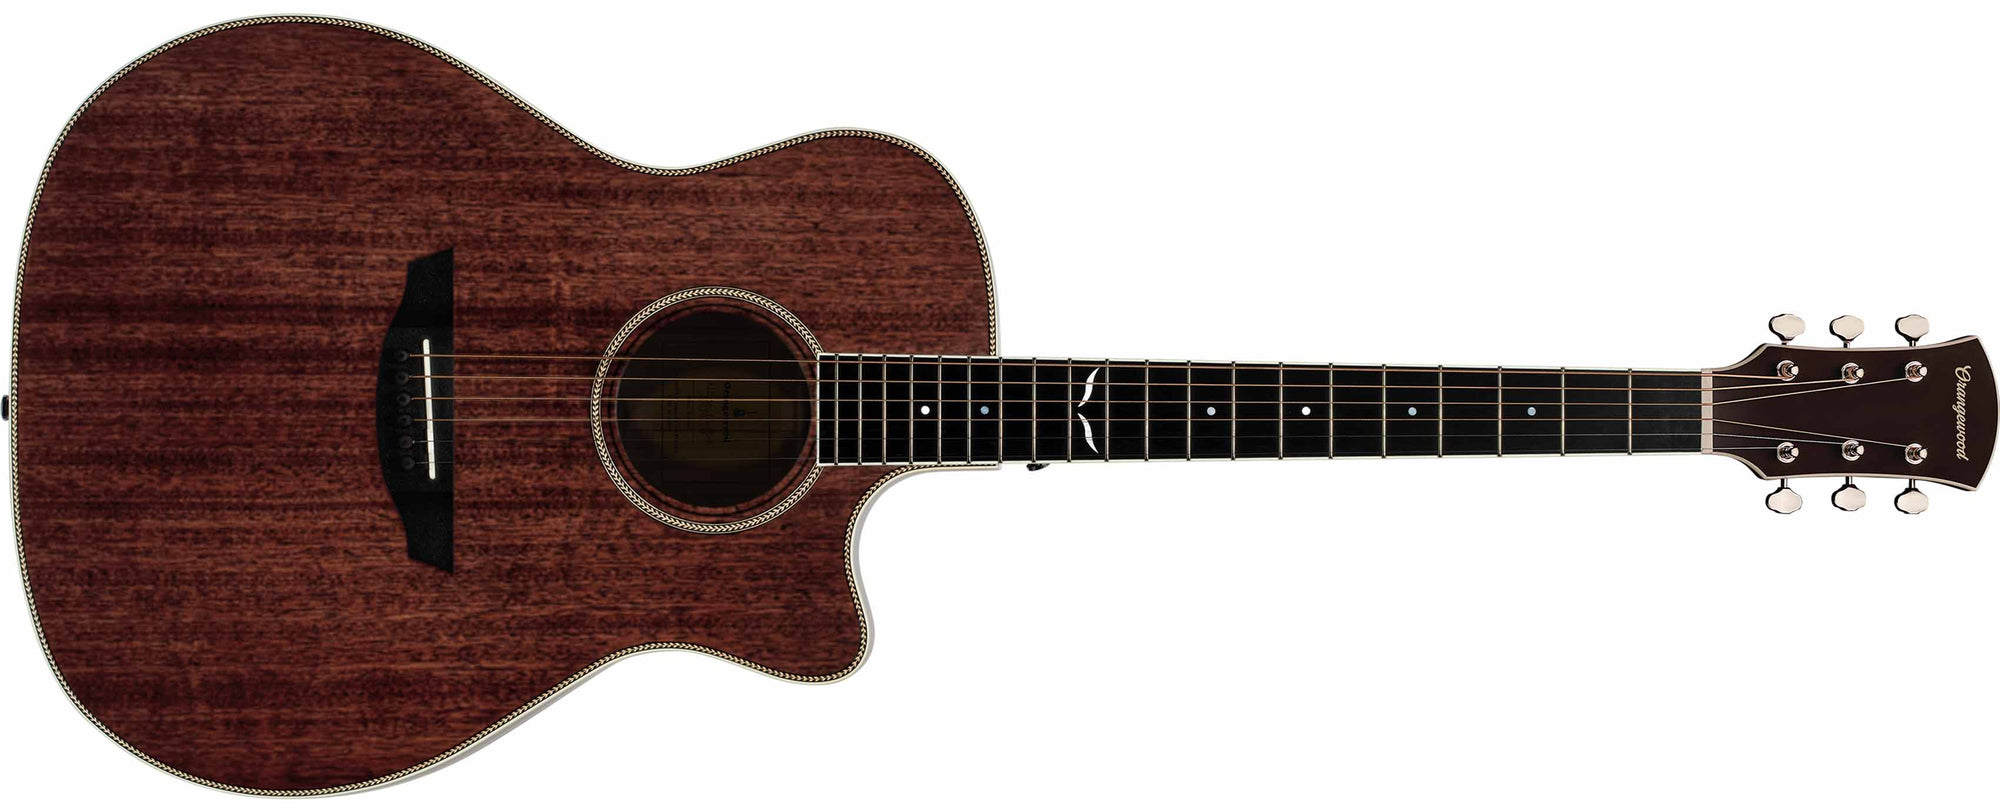 Mahogany grand auditorium cutaway acoustic guitar with an ebony fretboard, mother of pearl inlays, and silver hardware